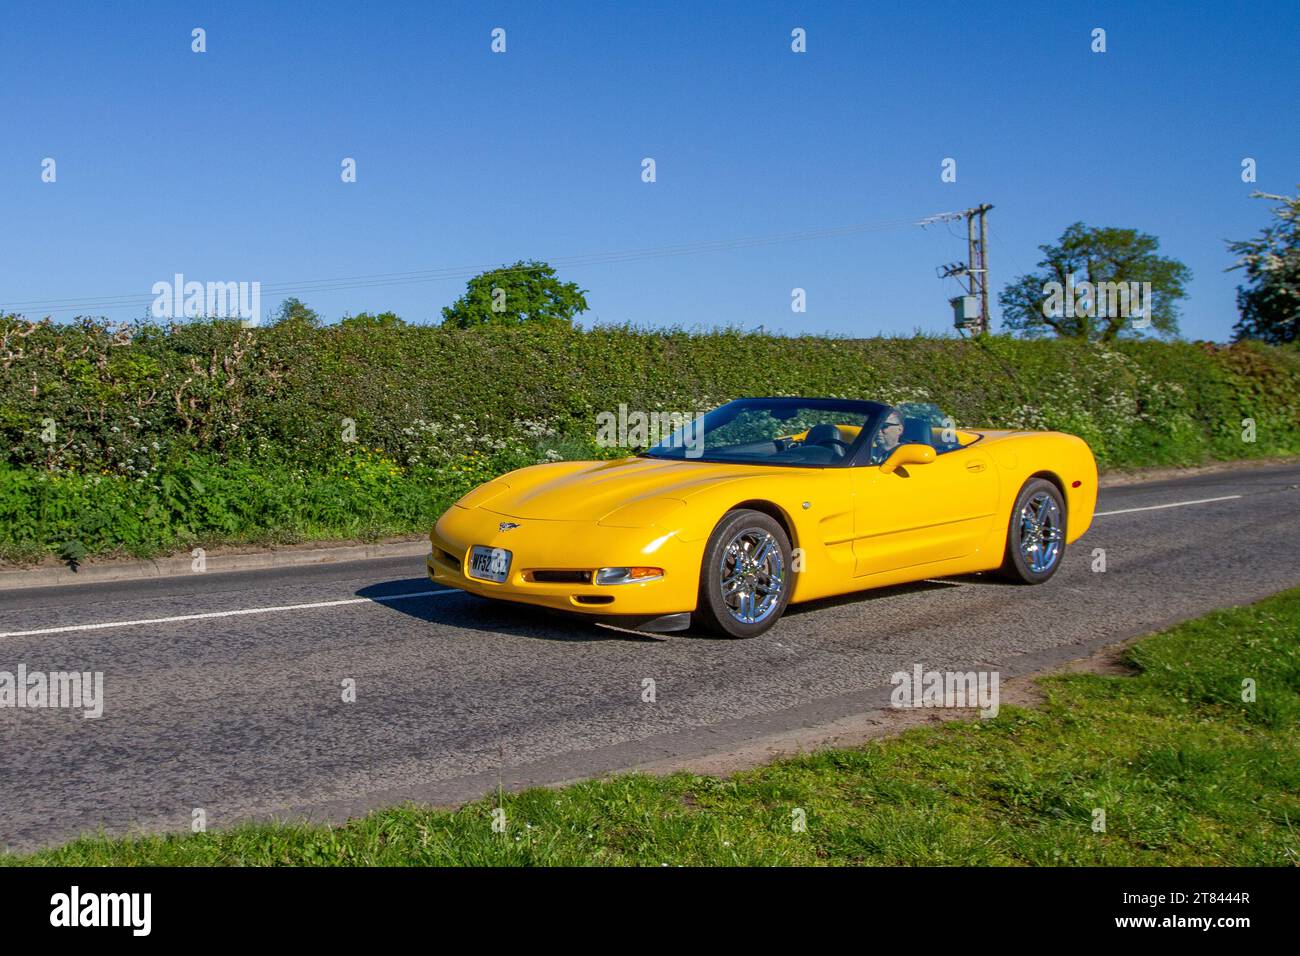 2003 Yellow American Chevrolet Gmc Corvette-2003 Chevy Corvette Convertible 6 Speed 2dr, two-door, two-seater luxury sports car; travelling on rural roads in Cheshire, UK Stock Photo